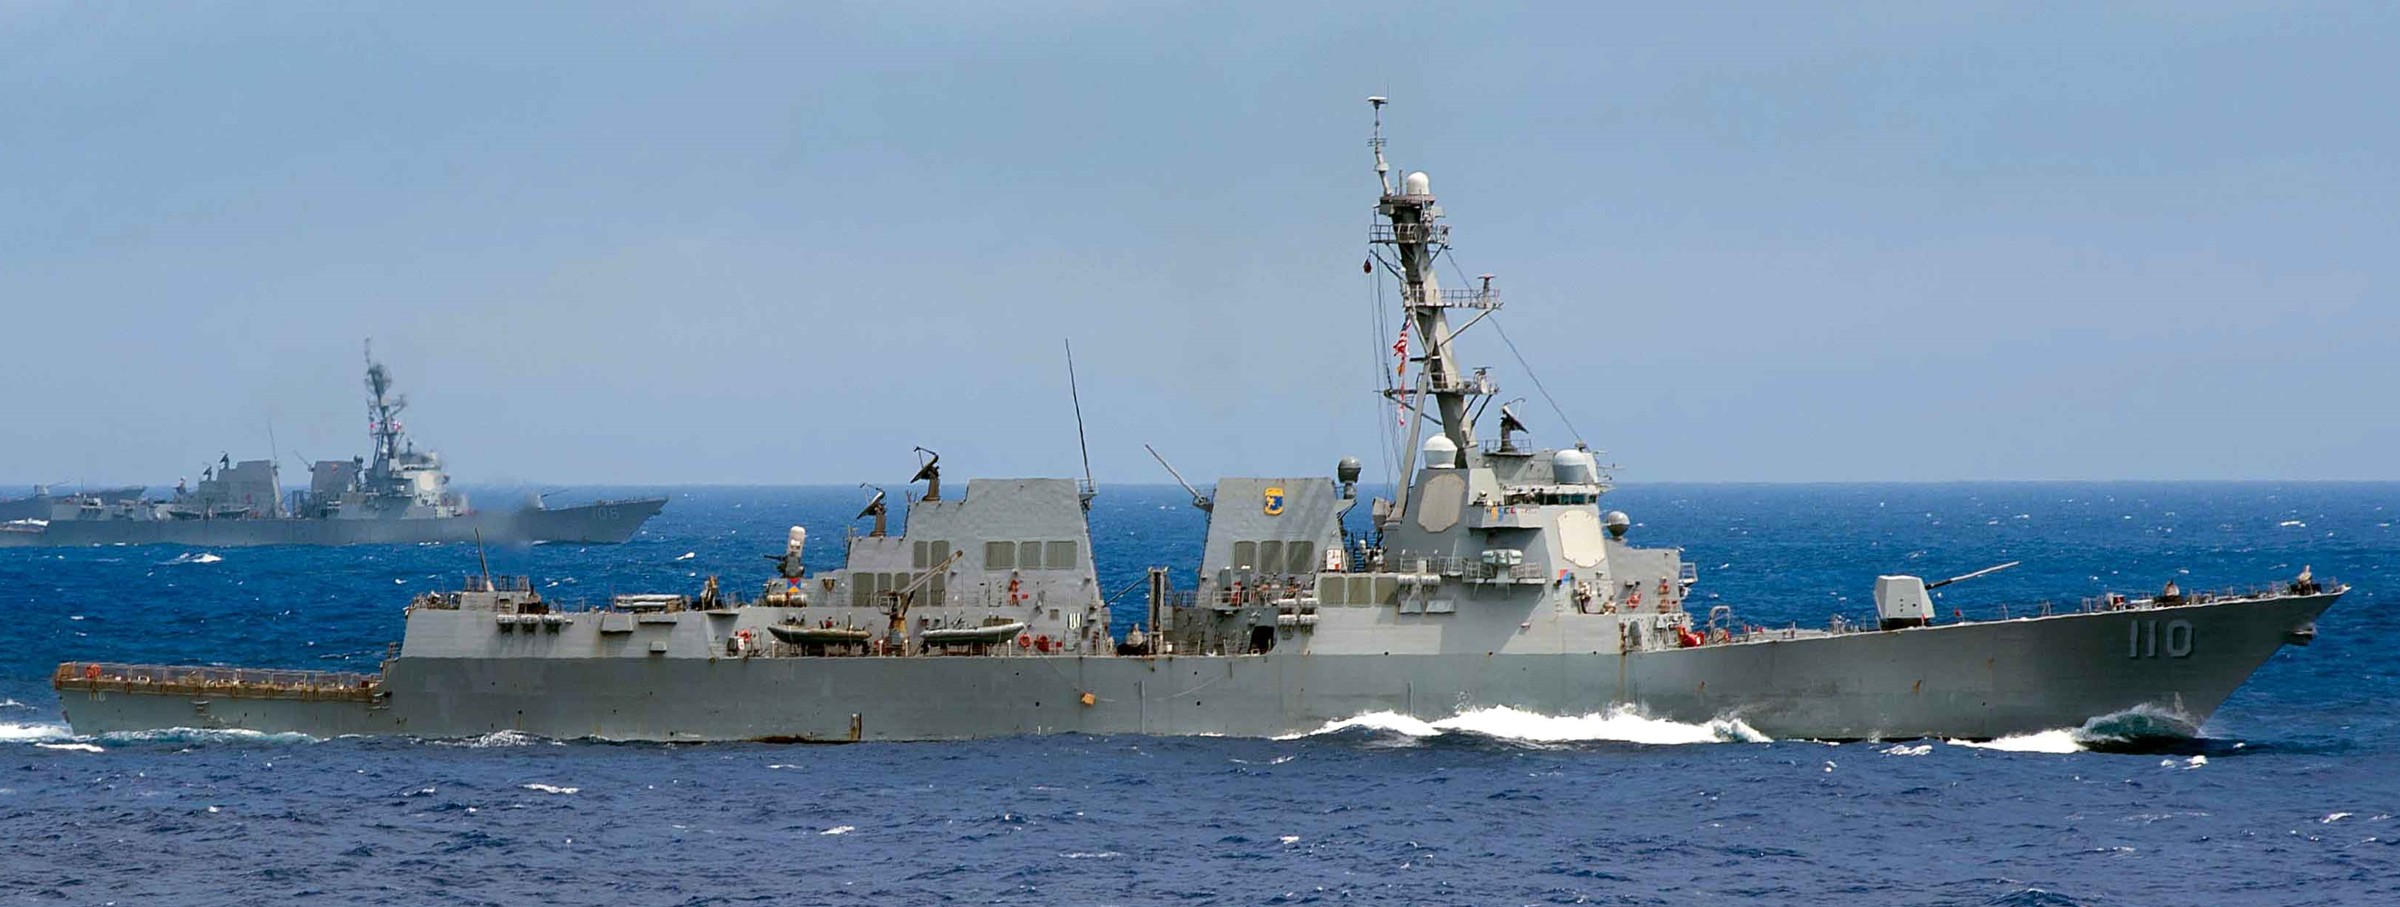 ddg-110 uss william p. lawrence arleigh burke class guided missile destroyer aegis us navy philippine sea 07p